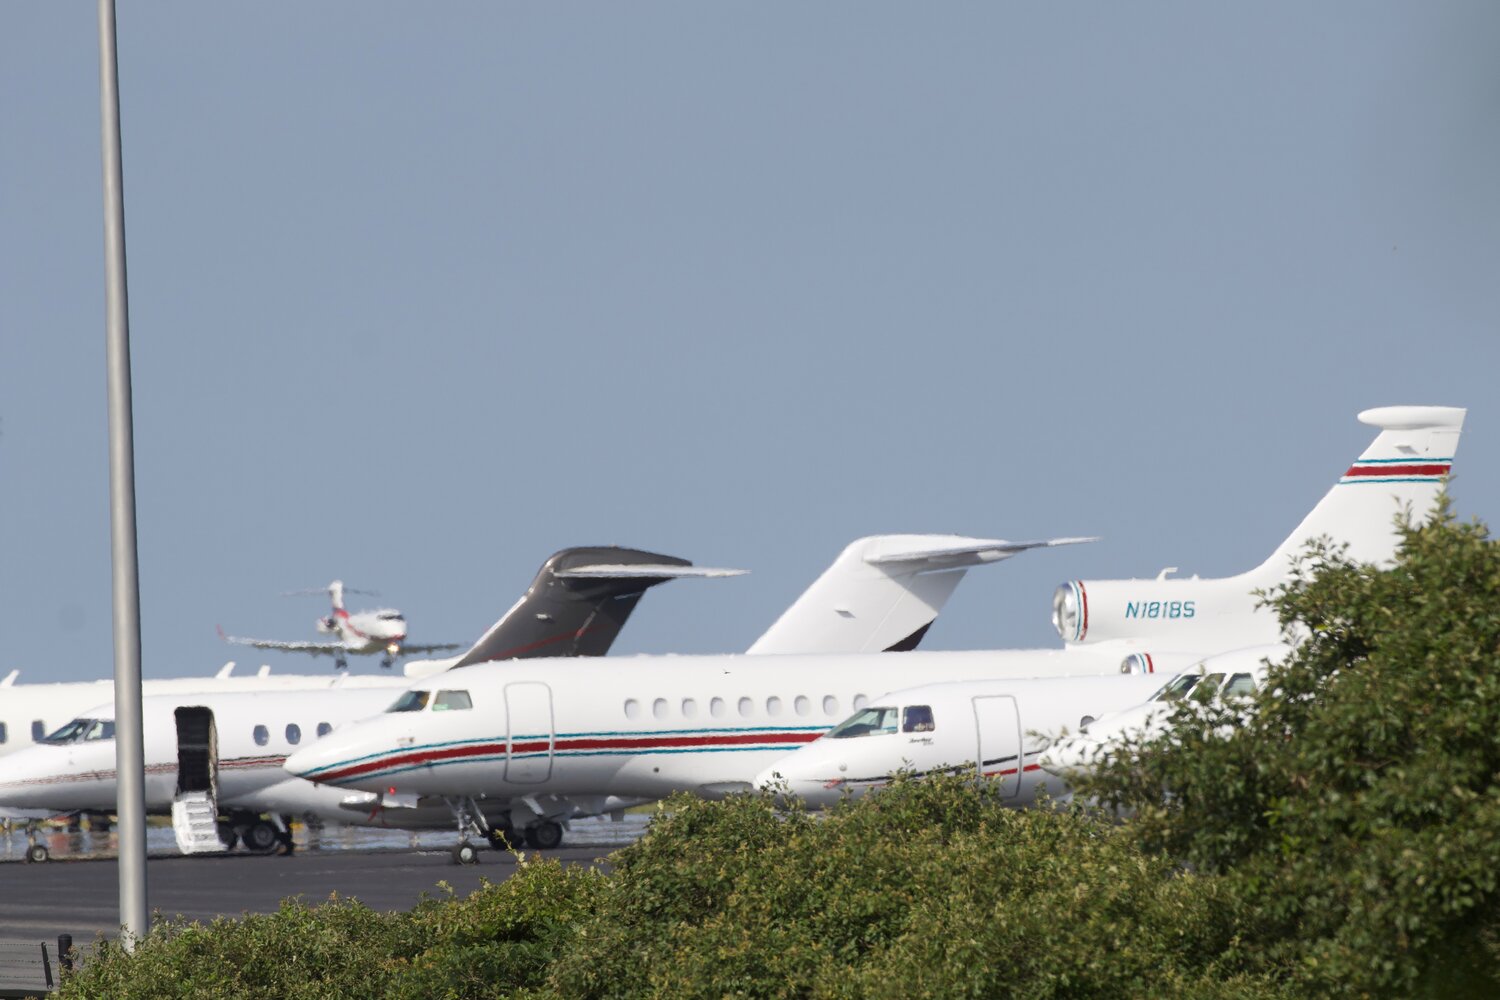 Private jets stacked up on the apron at Nantucket Memorial Airport as another approaches the runway.